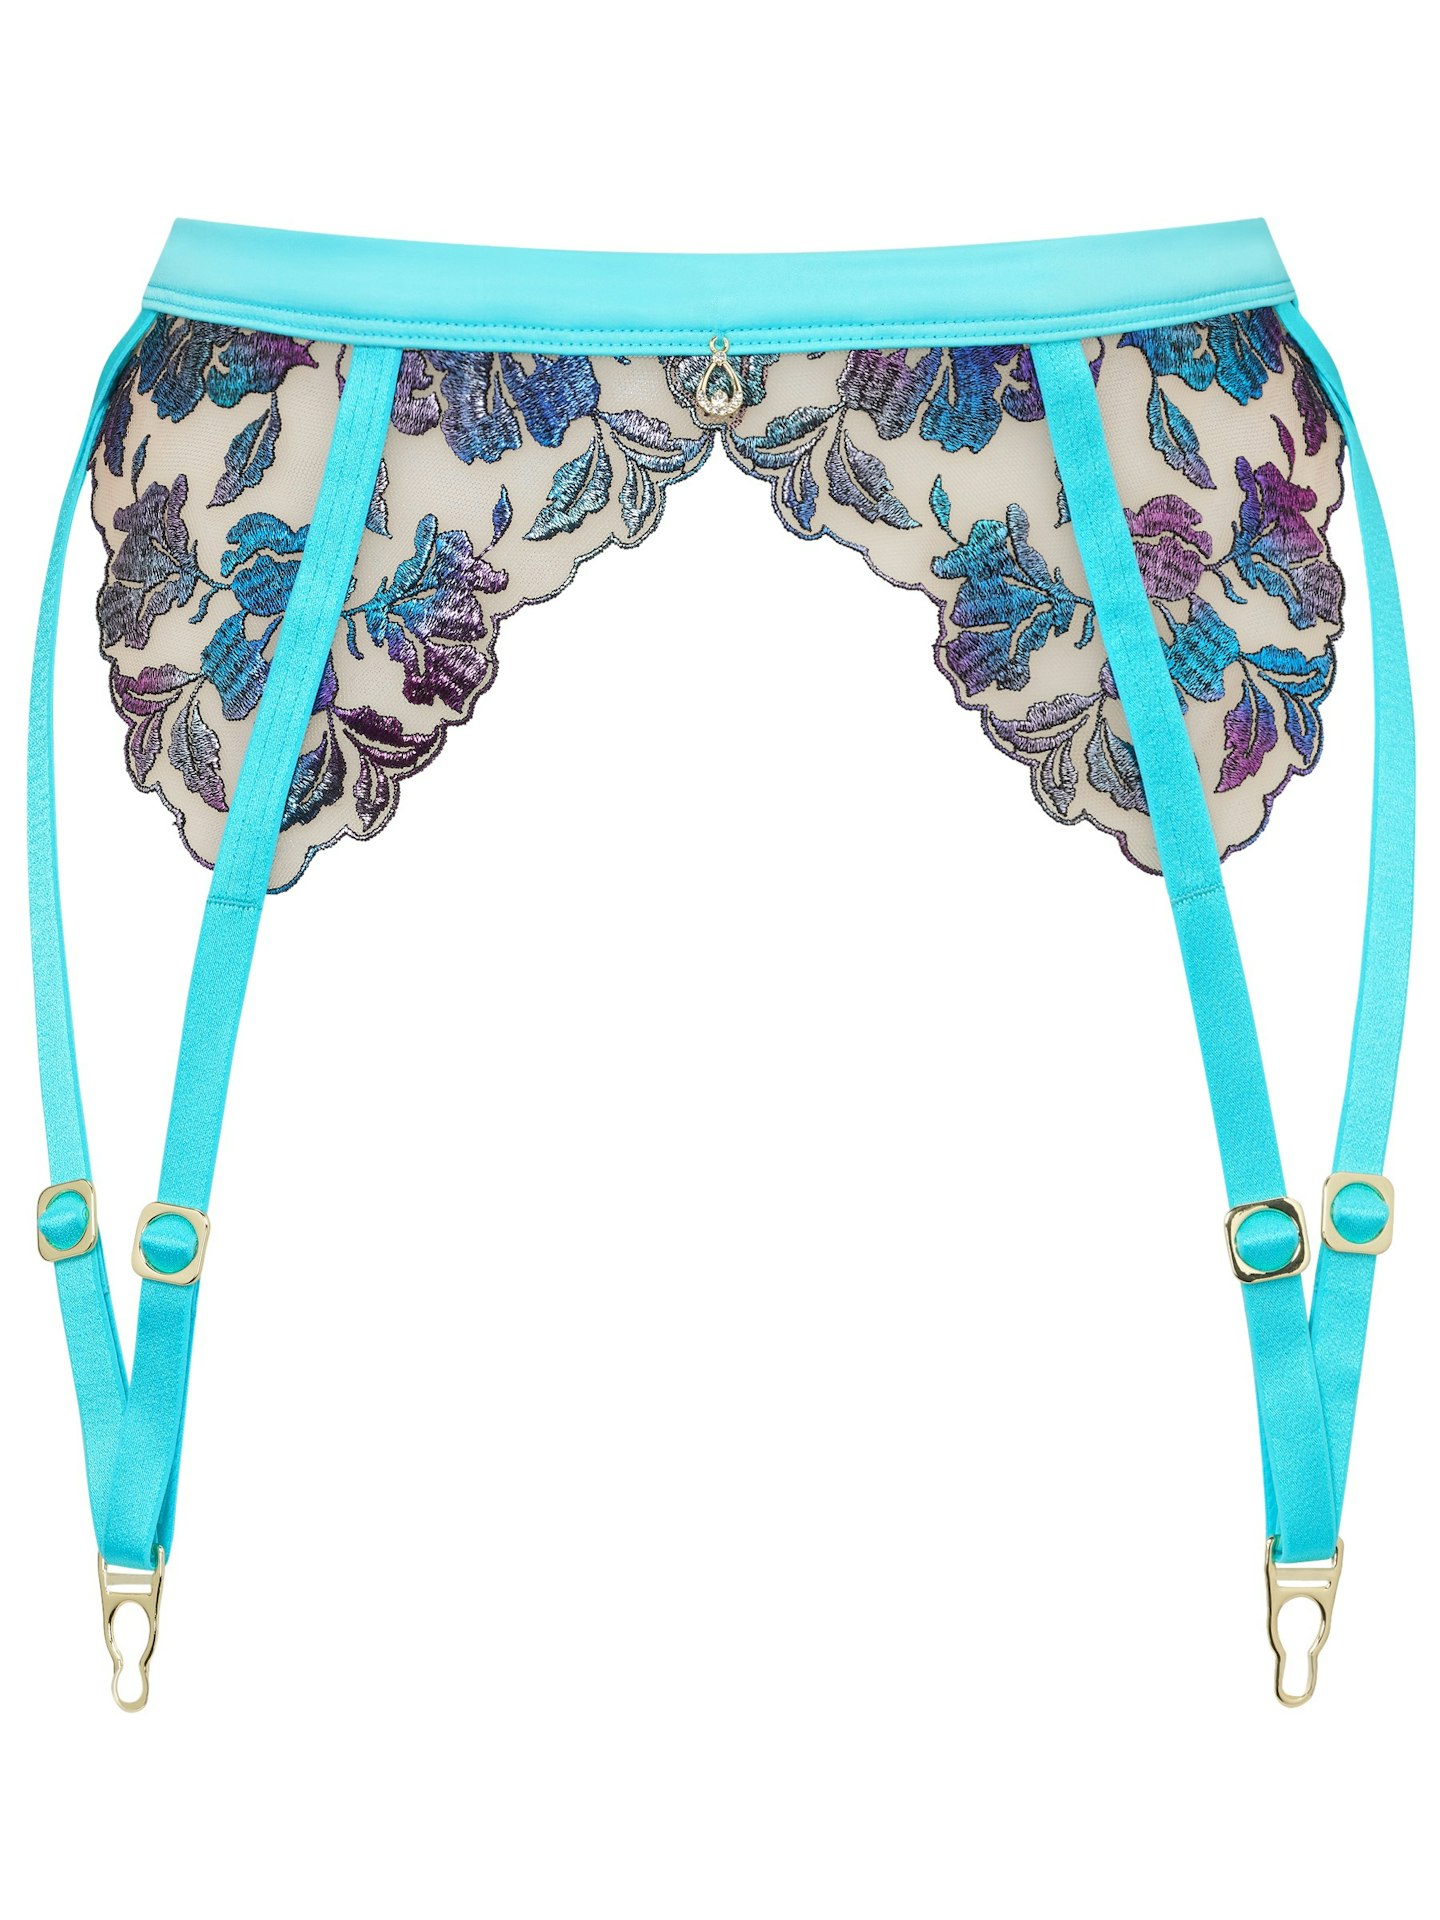 Ann Summers blue turquoise leg waspie with intricate floral embroidery